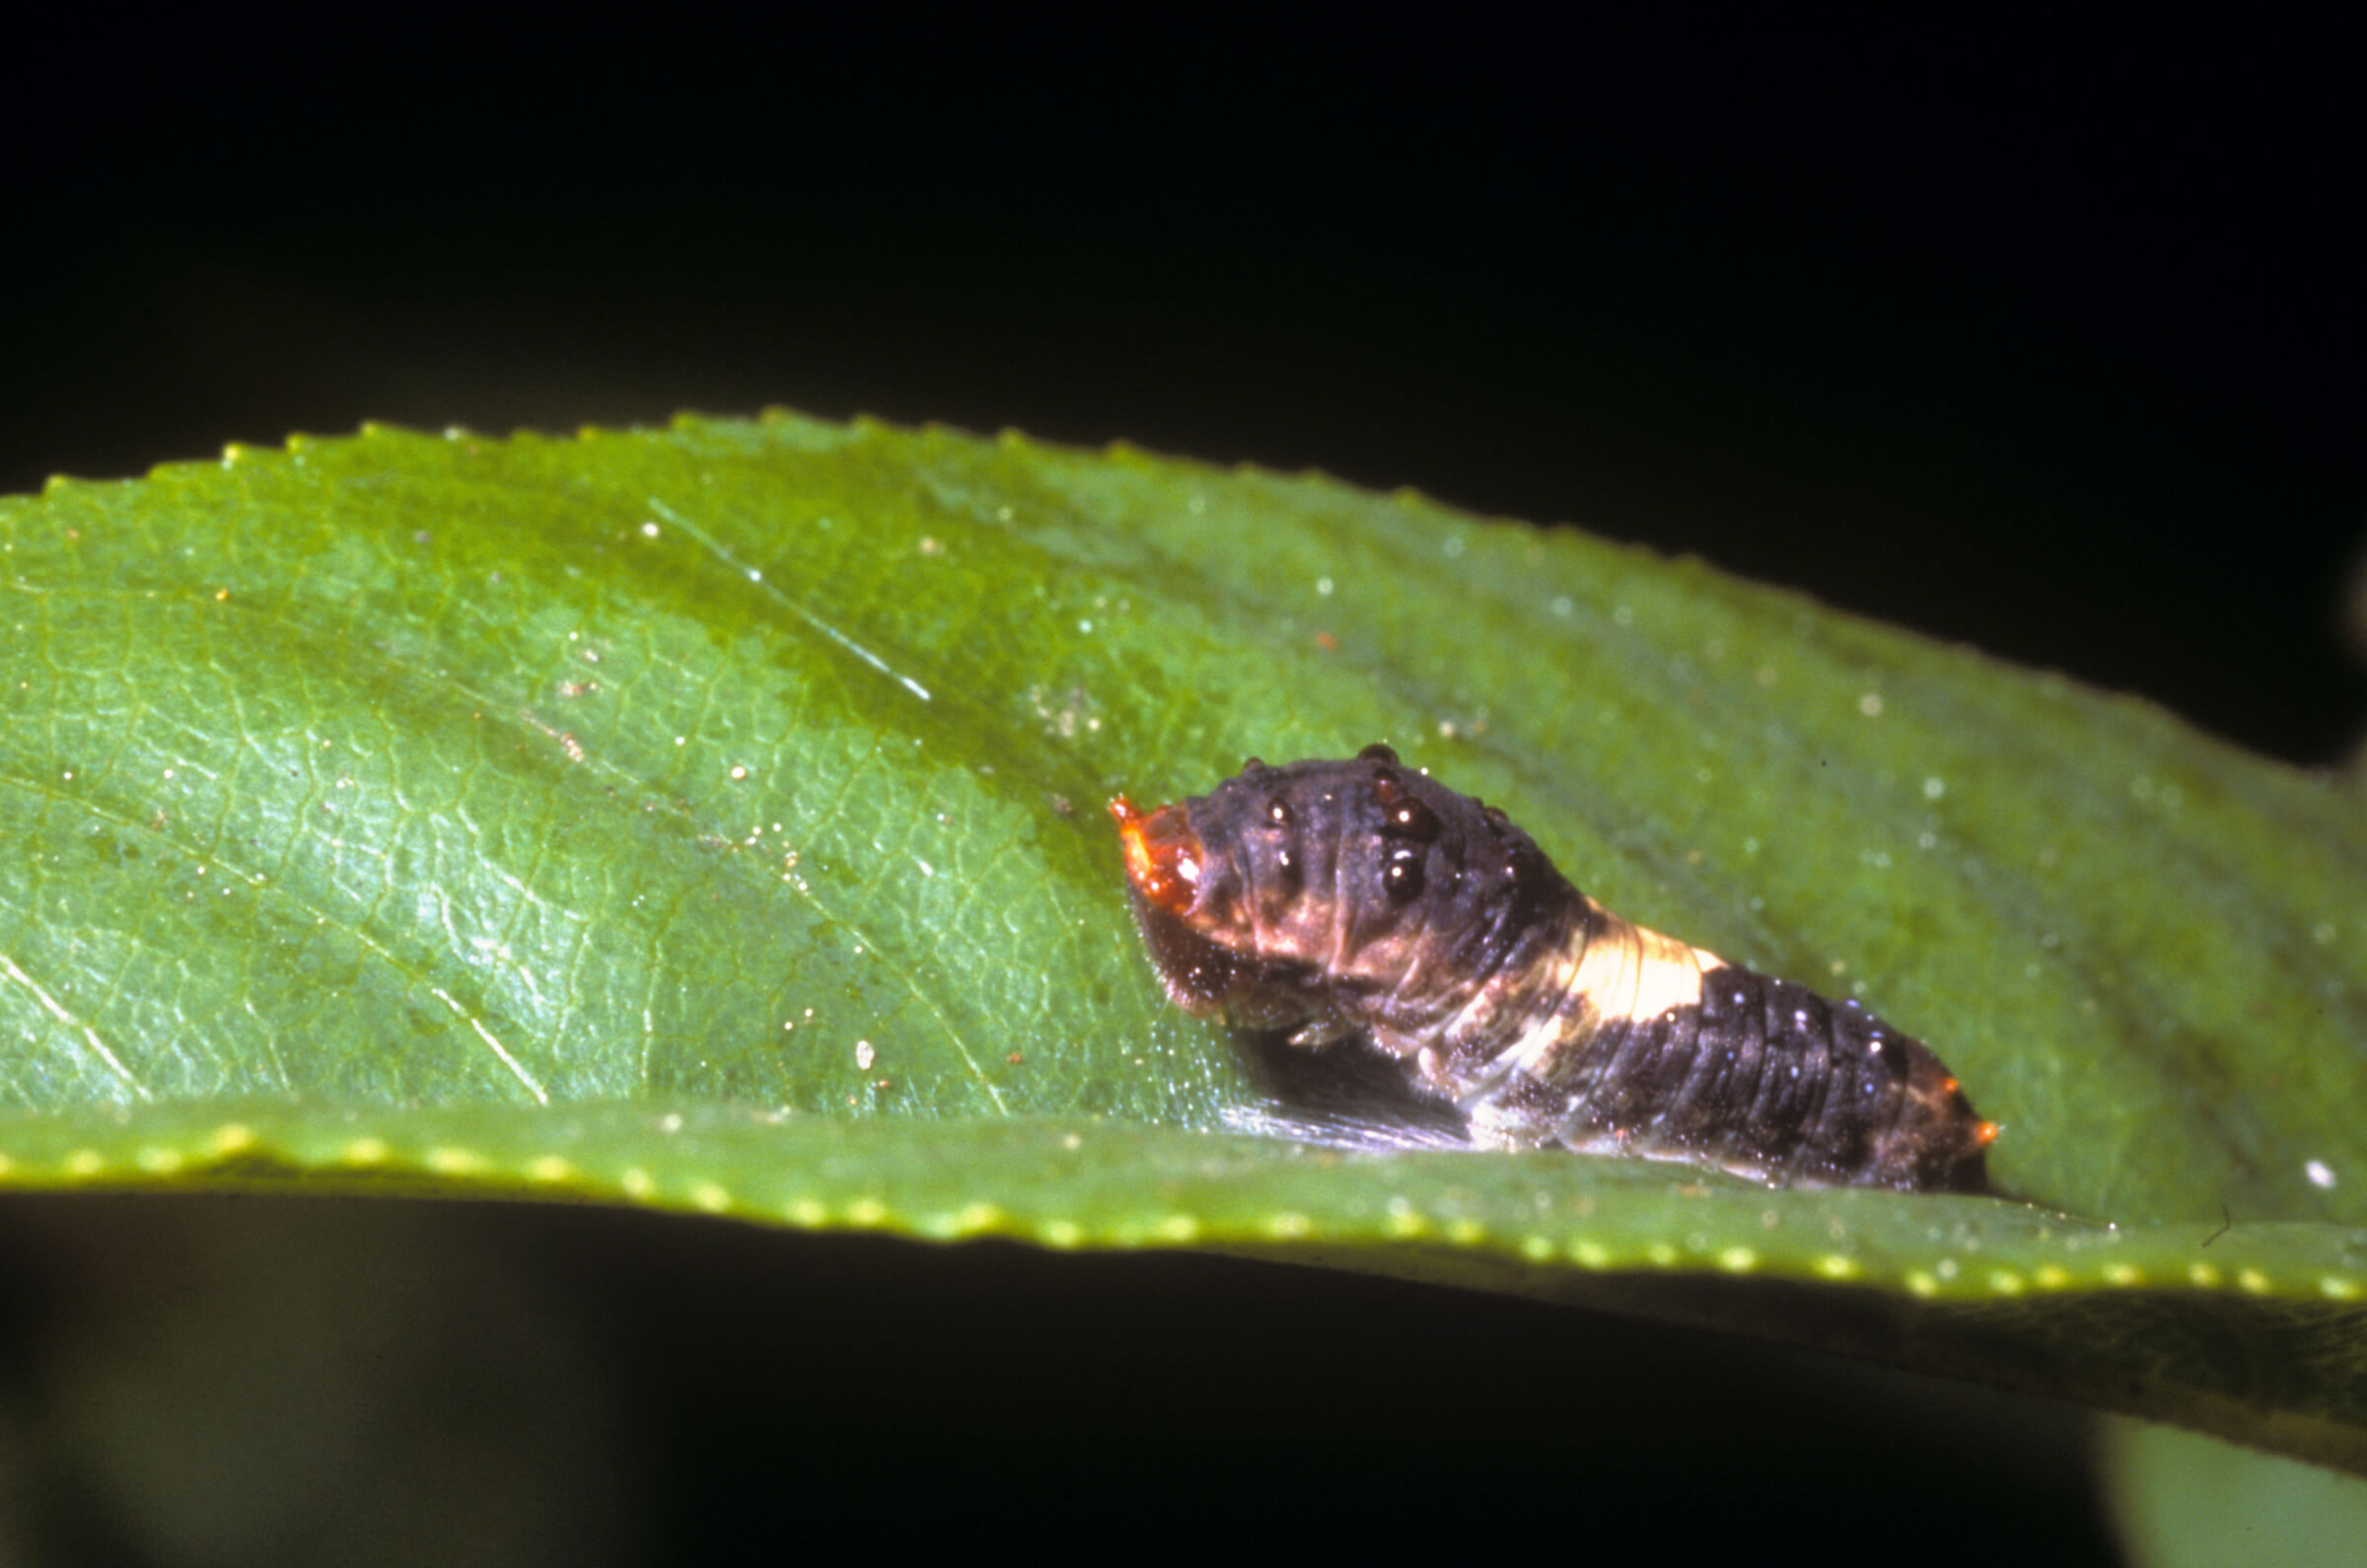 The early instar larva of the Pale Swallowtail mimics a bird dropping. Photo by Bob Stewart.